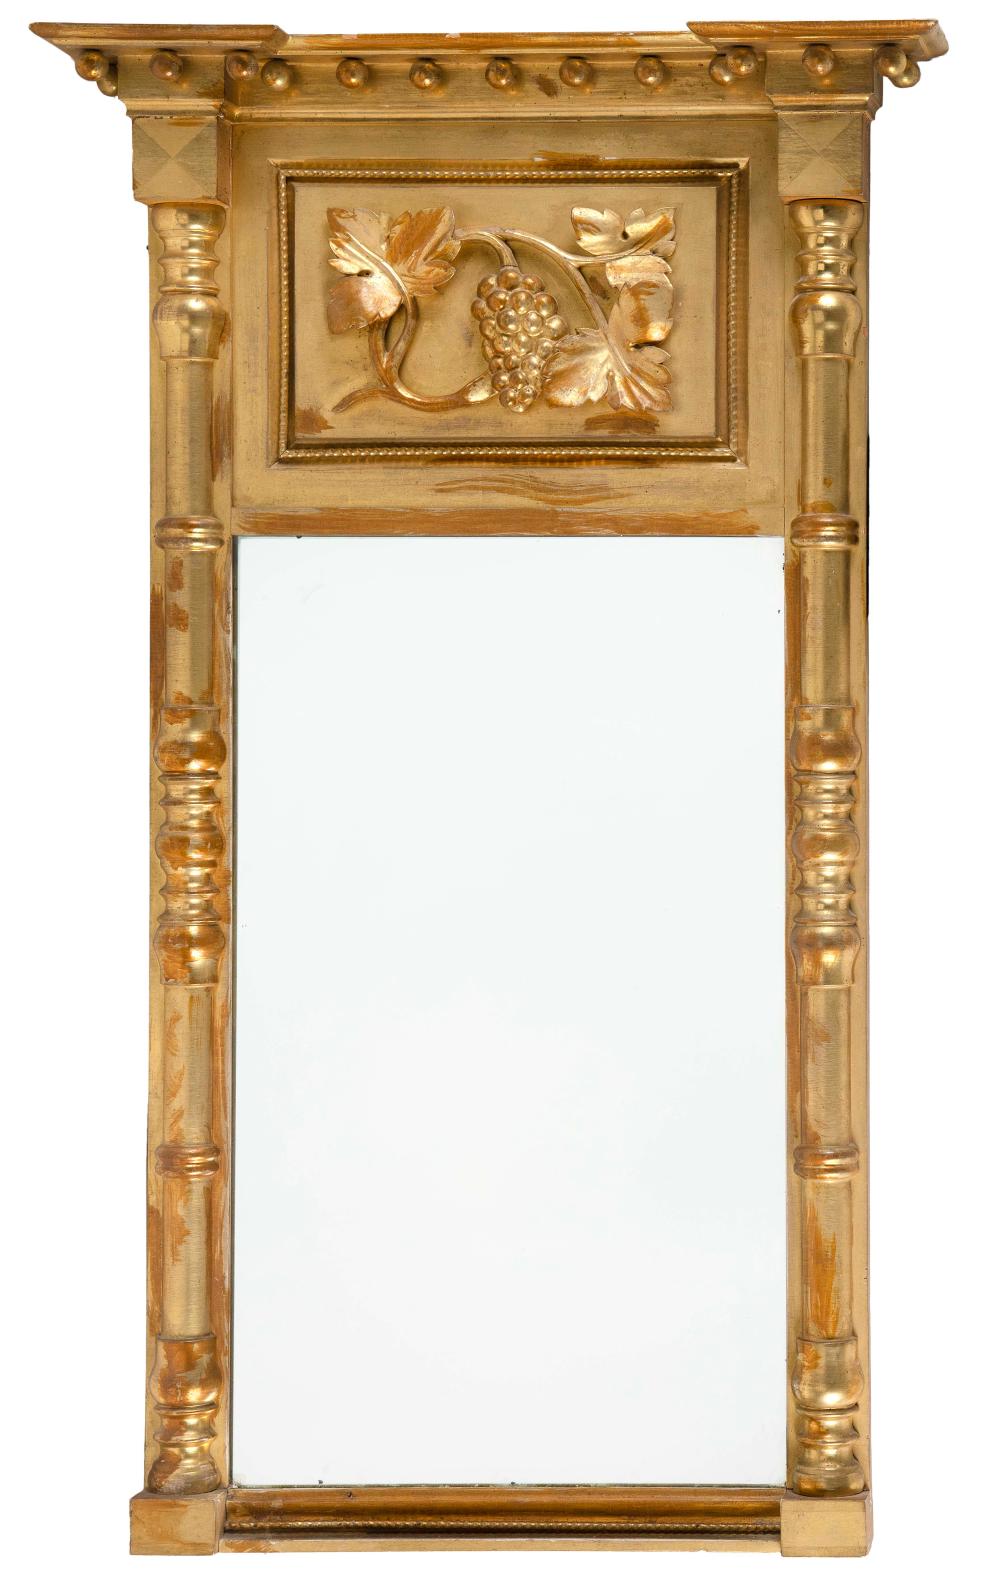 SHERATON CLASSICAL STYLE GOLD LEAF 34daed